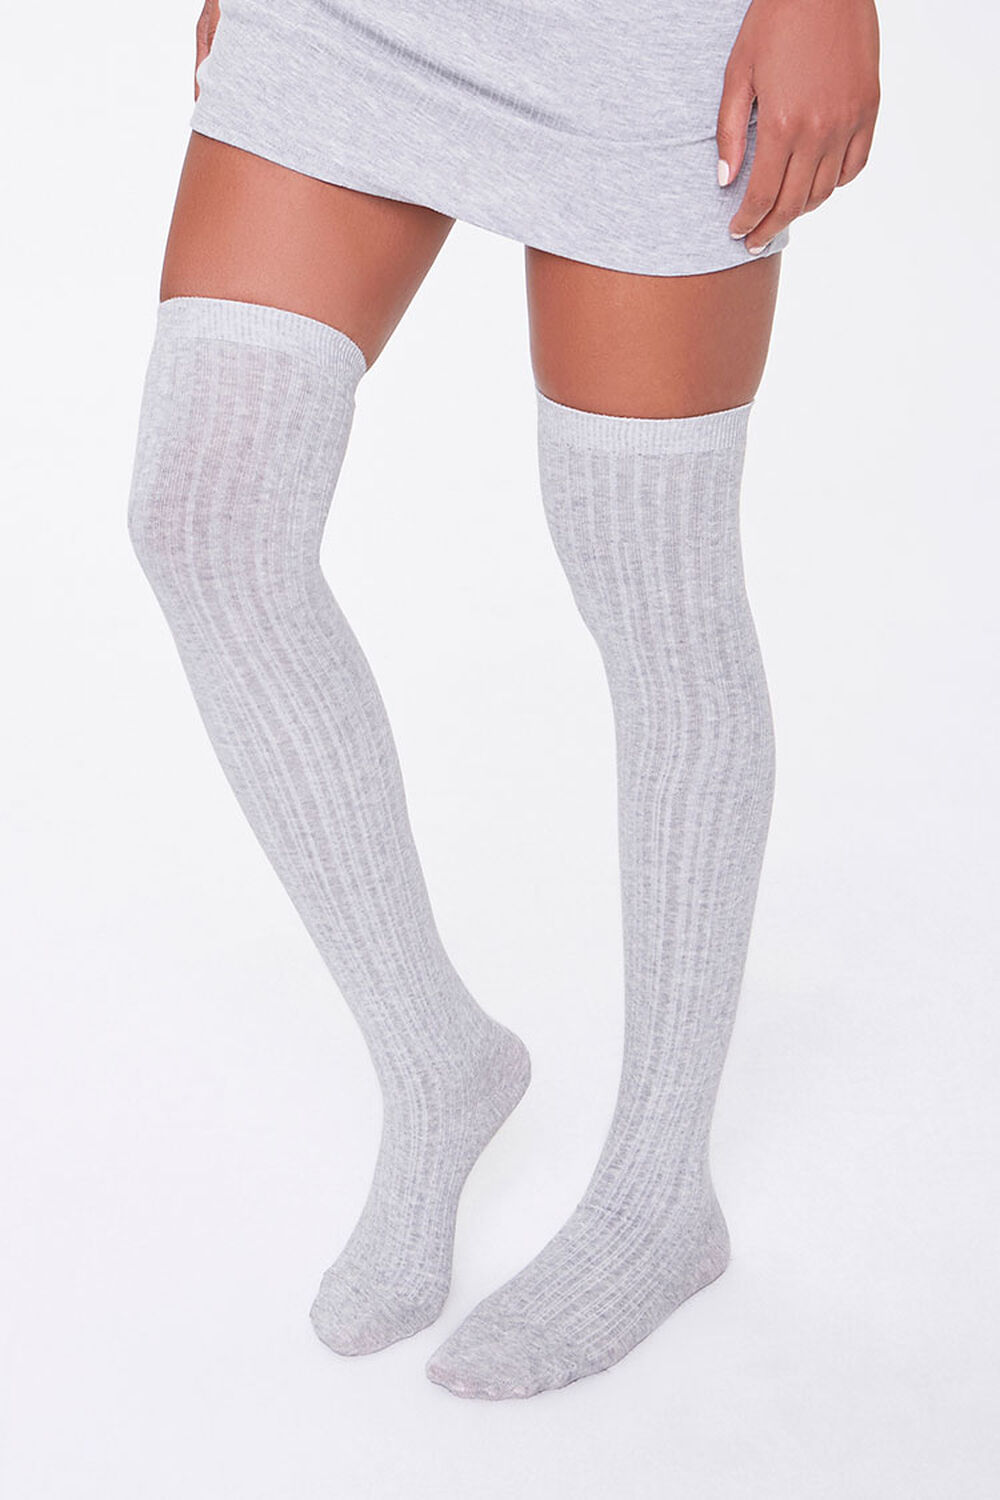 Ribbed Over-the-Knee Socks, image 1